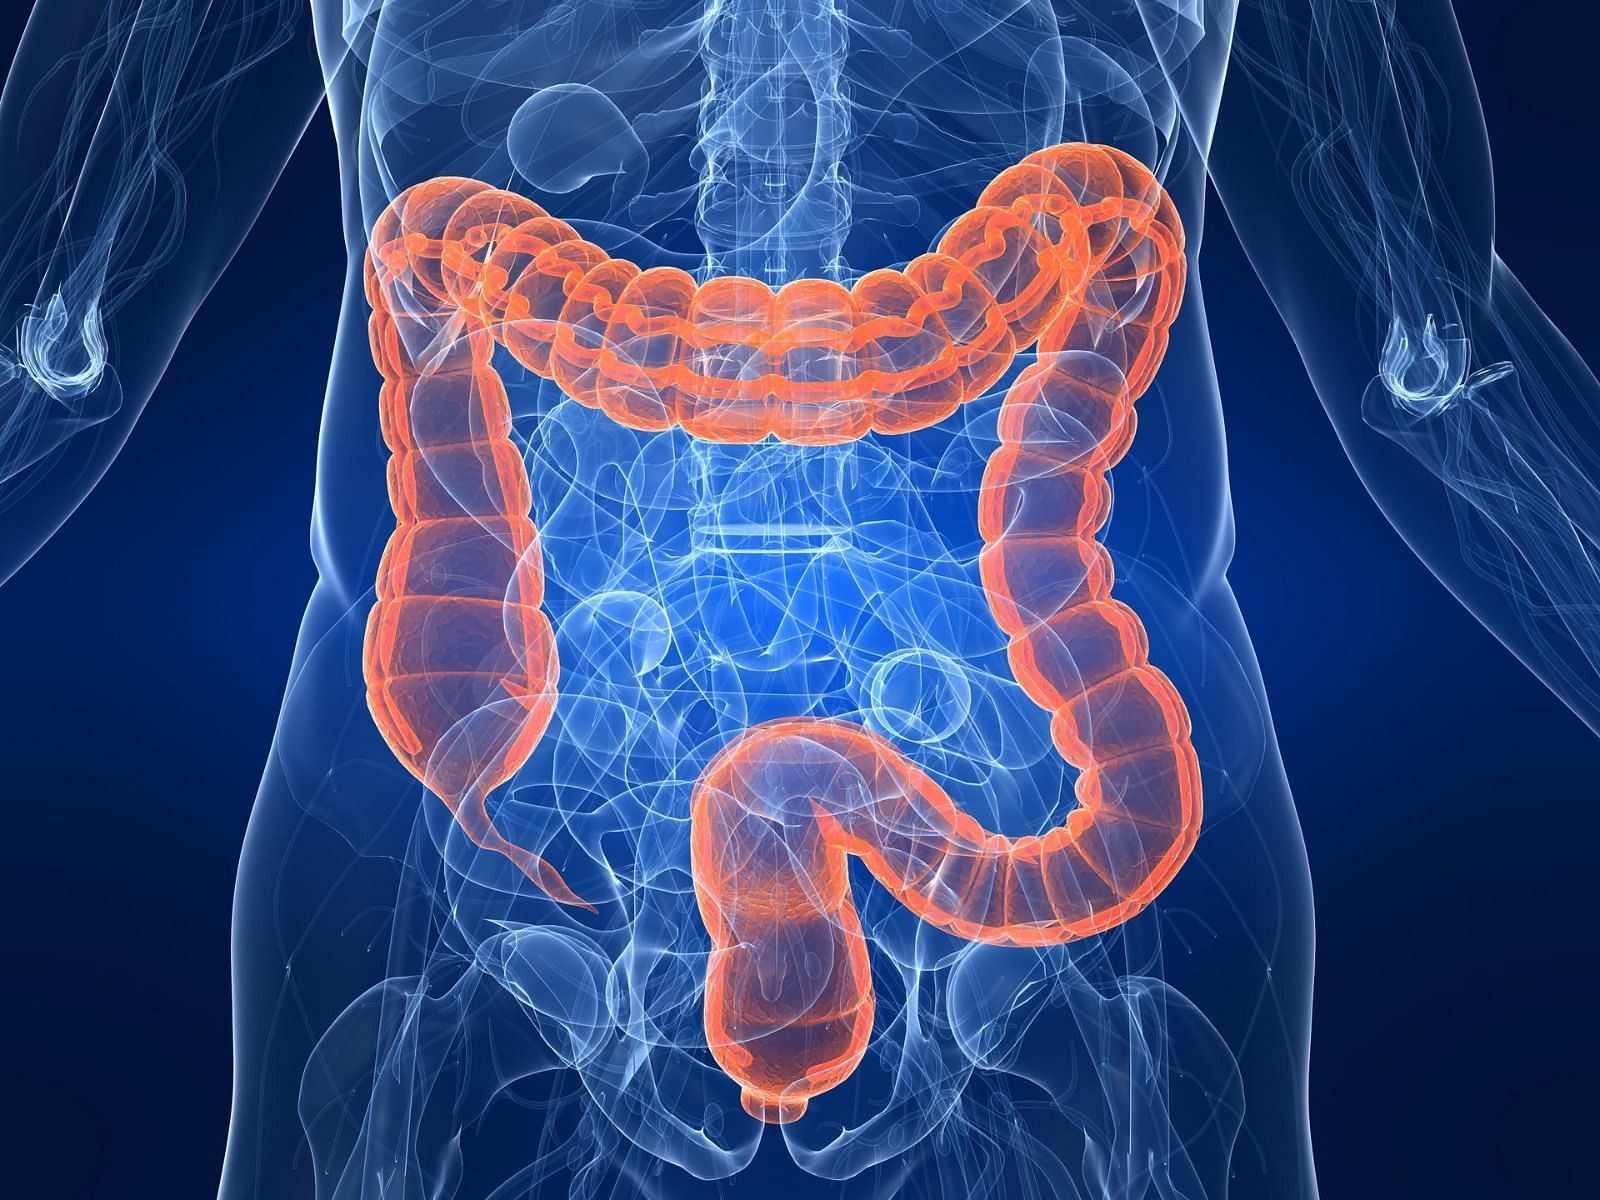 Digestive cleansing diet (Image via Getty Images)